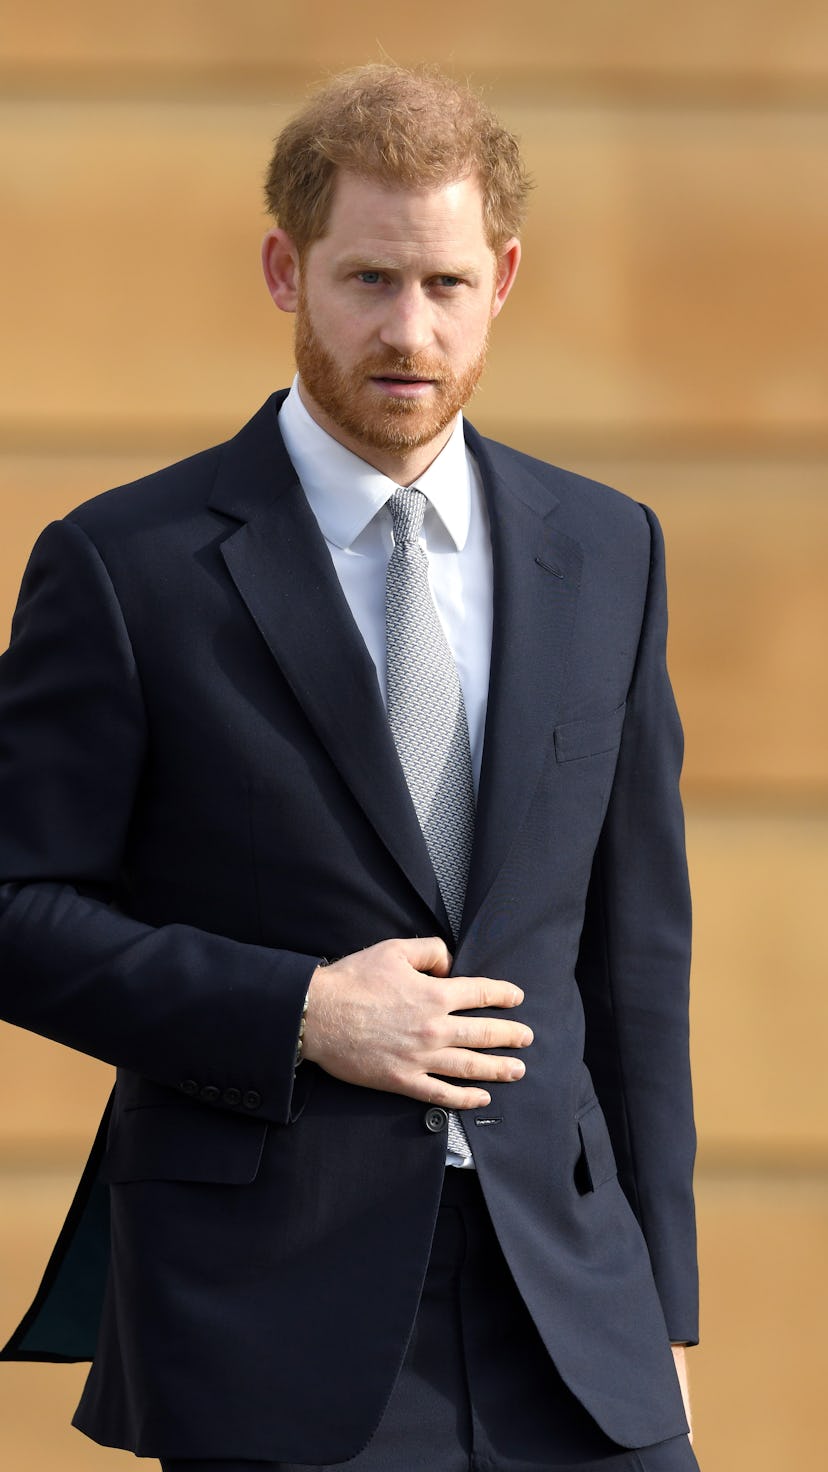 Prince Harry will make several TV appearances to coincide with the release of his 'Spare' memoir.